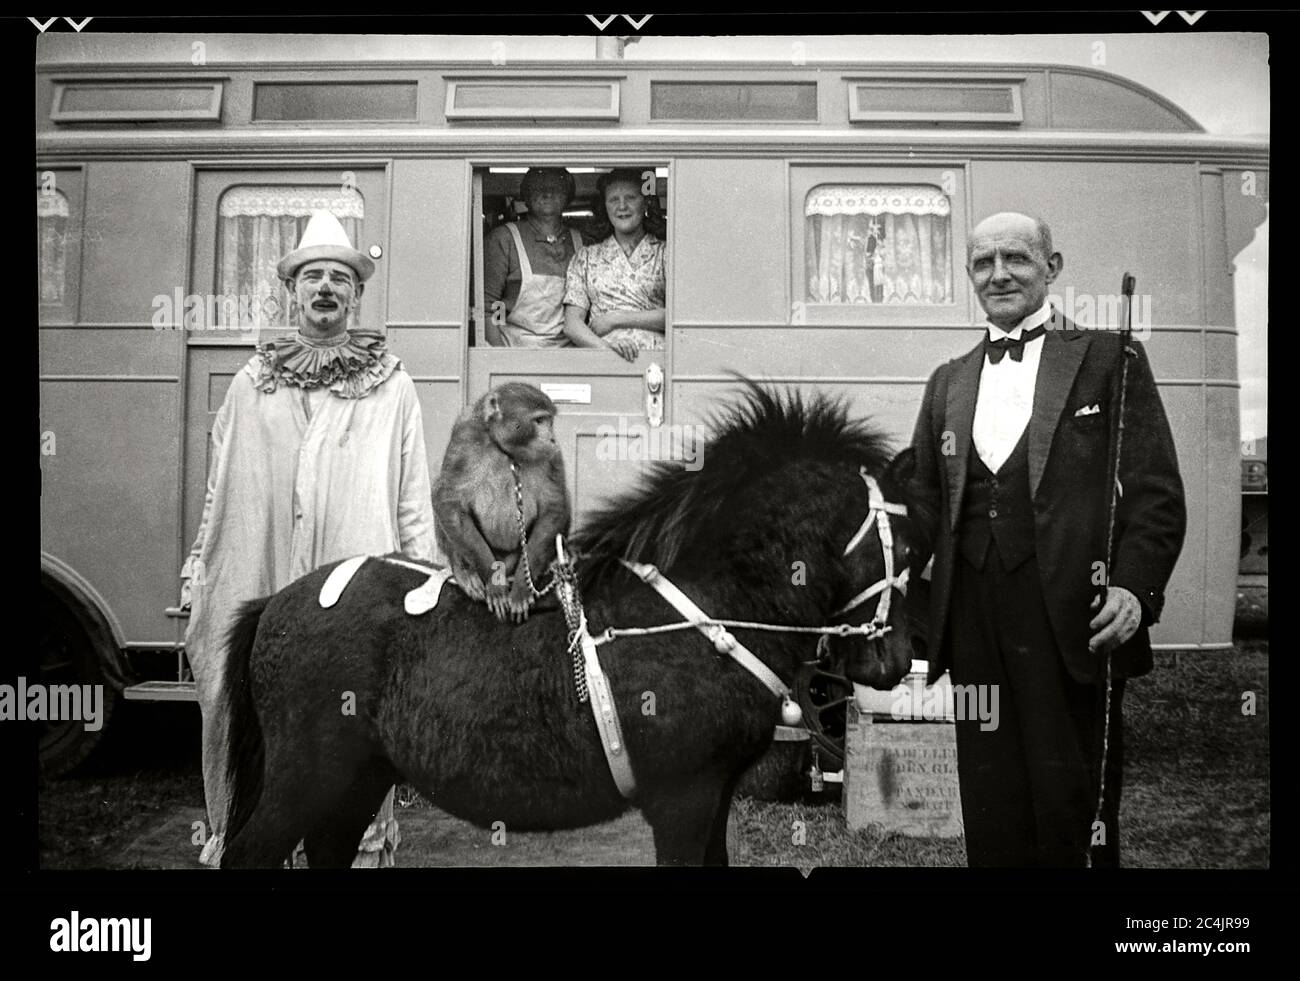 Circus trailer with performers in England, 1948. Image from 6x9 cm negative. Stock Photo